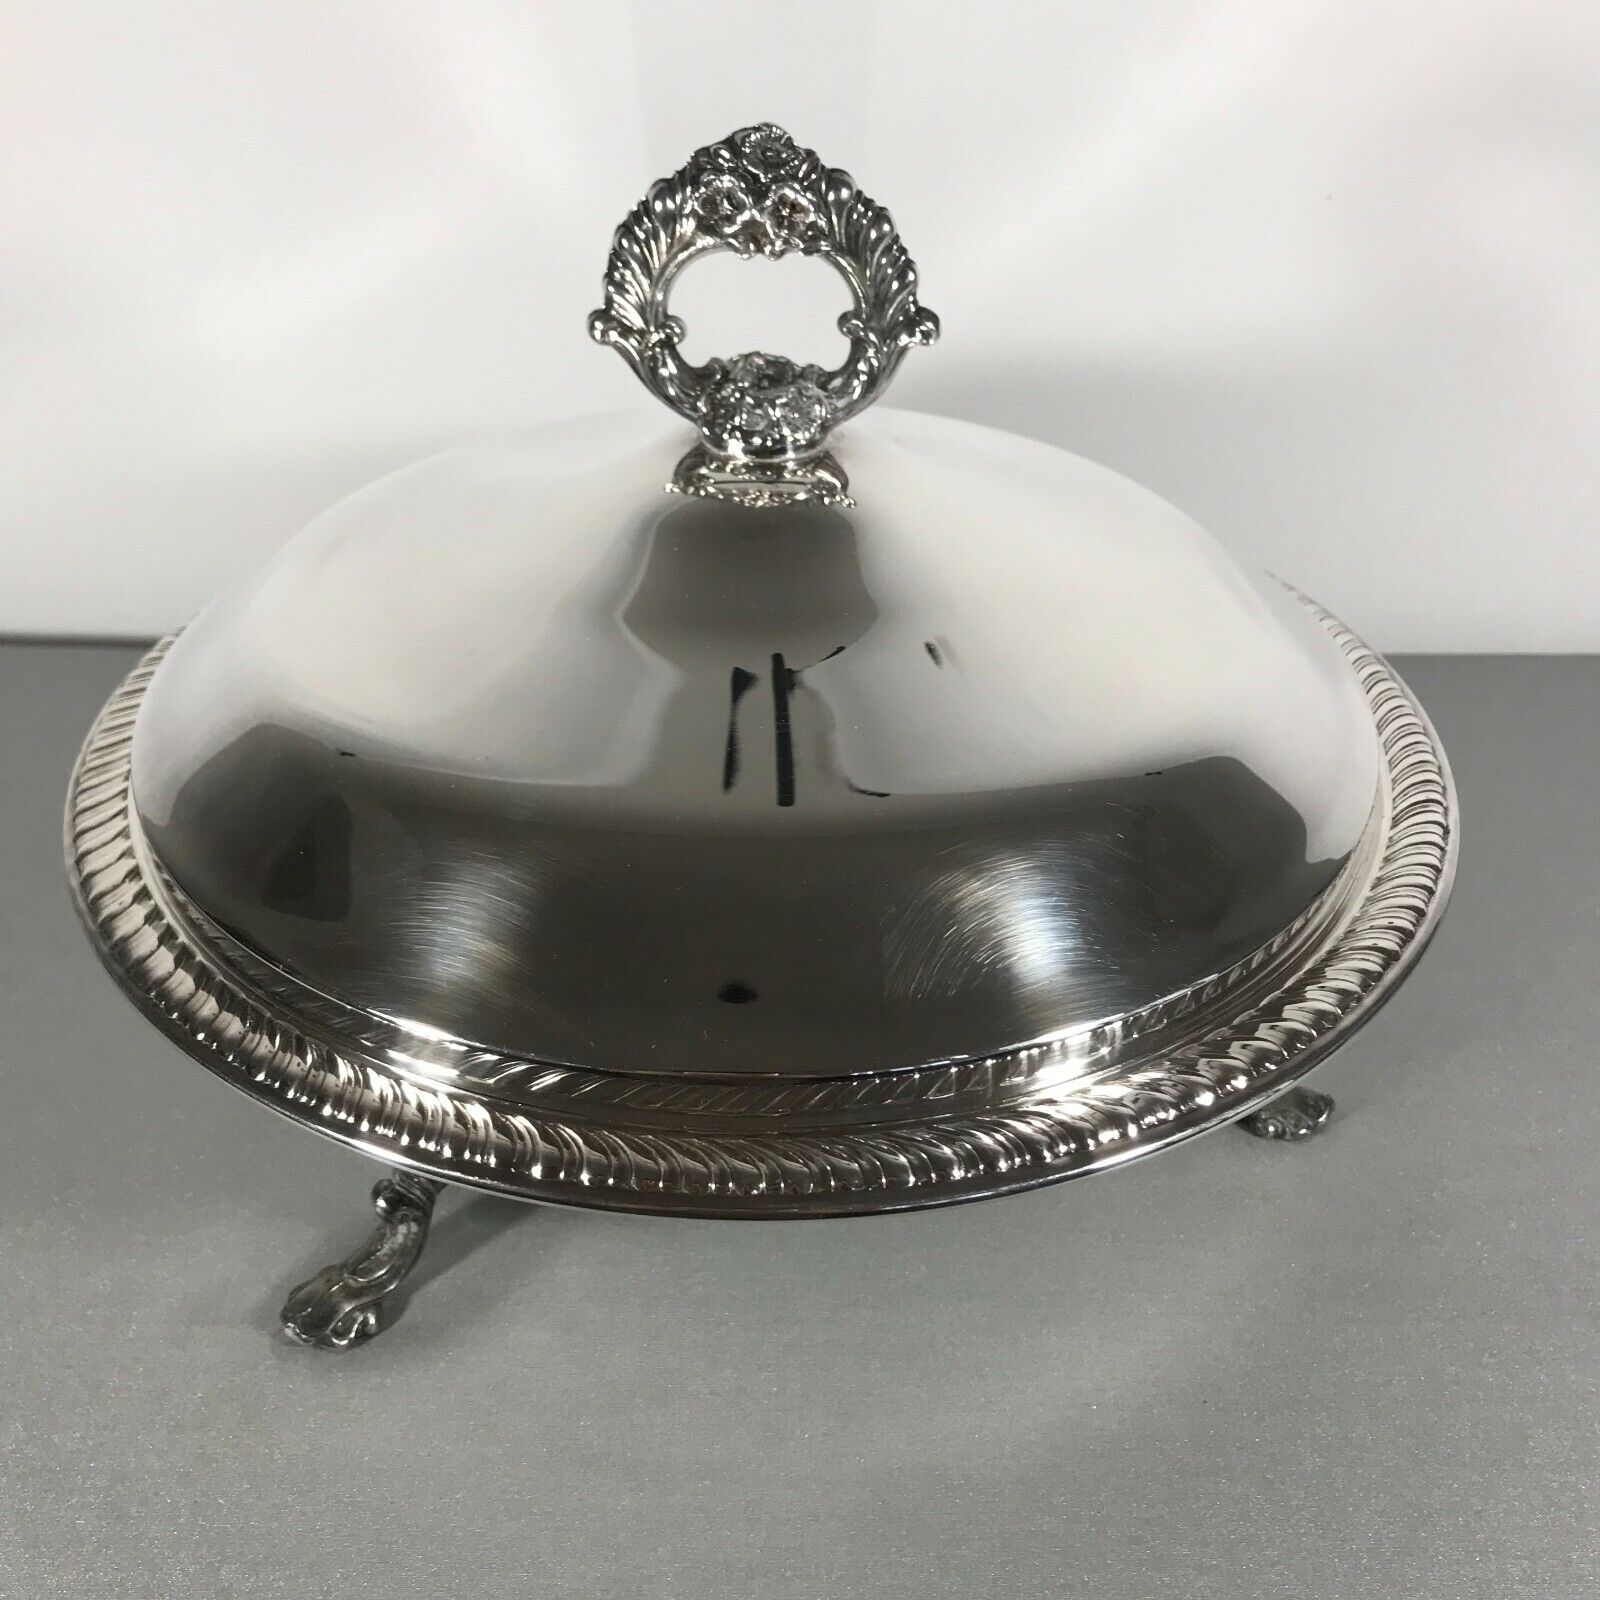 FB Rogers Silver Co Silver-Plated Serving Dish with Pyrex Casserole Serving Dish